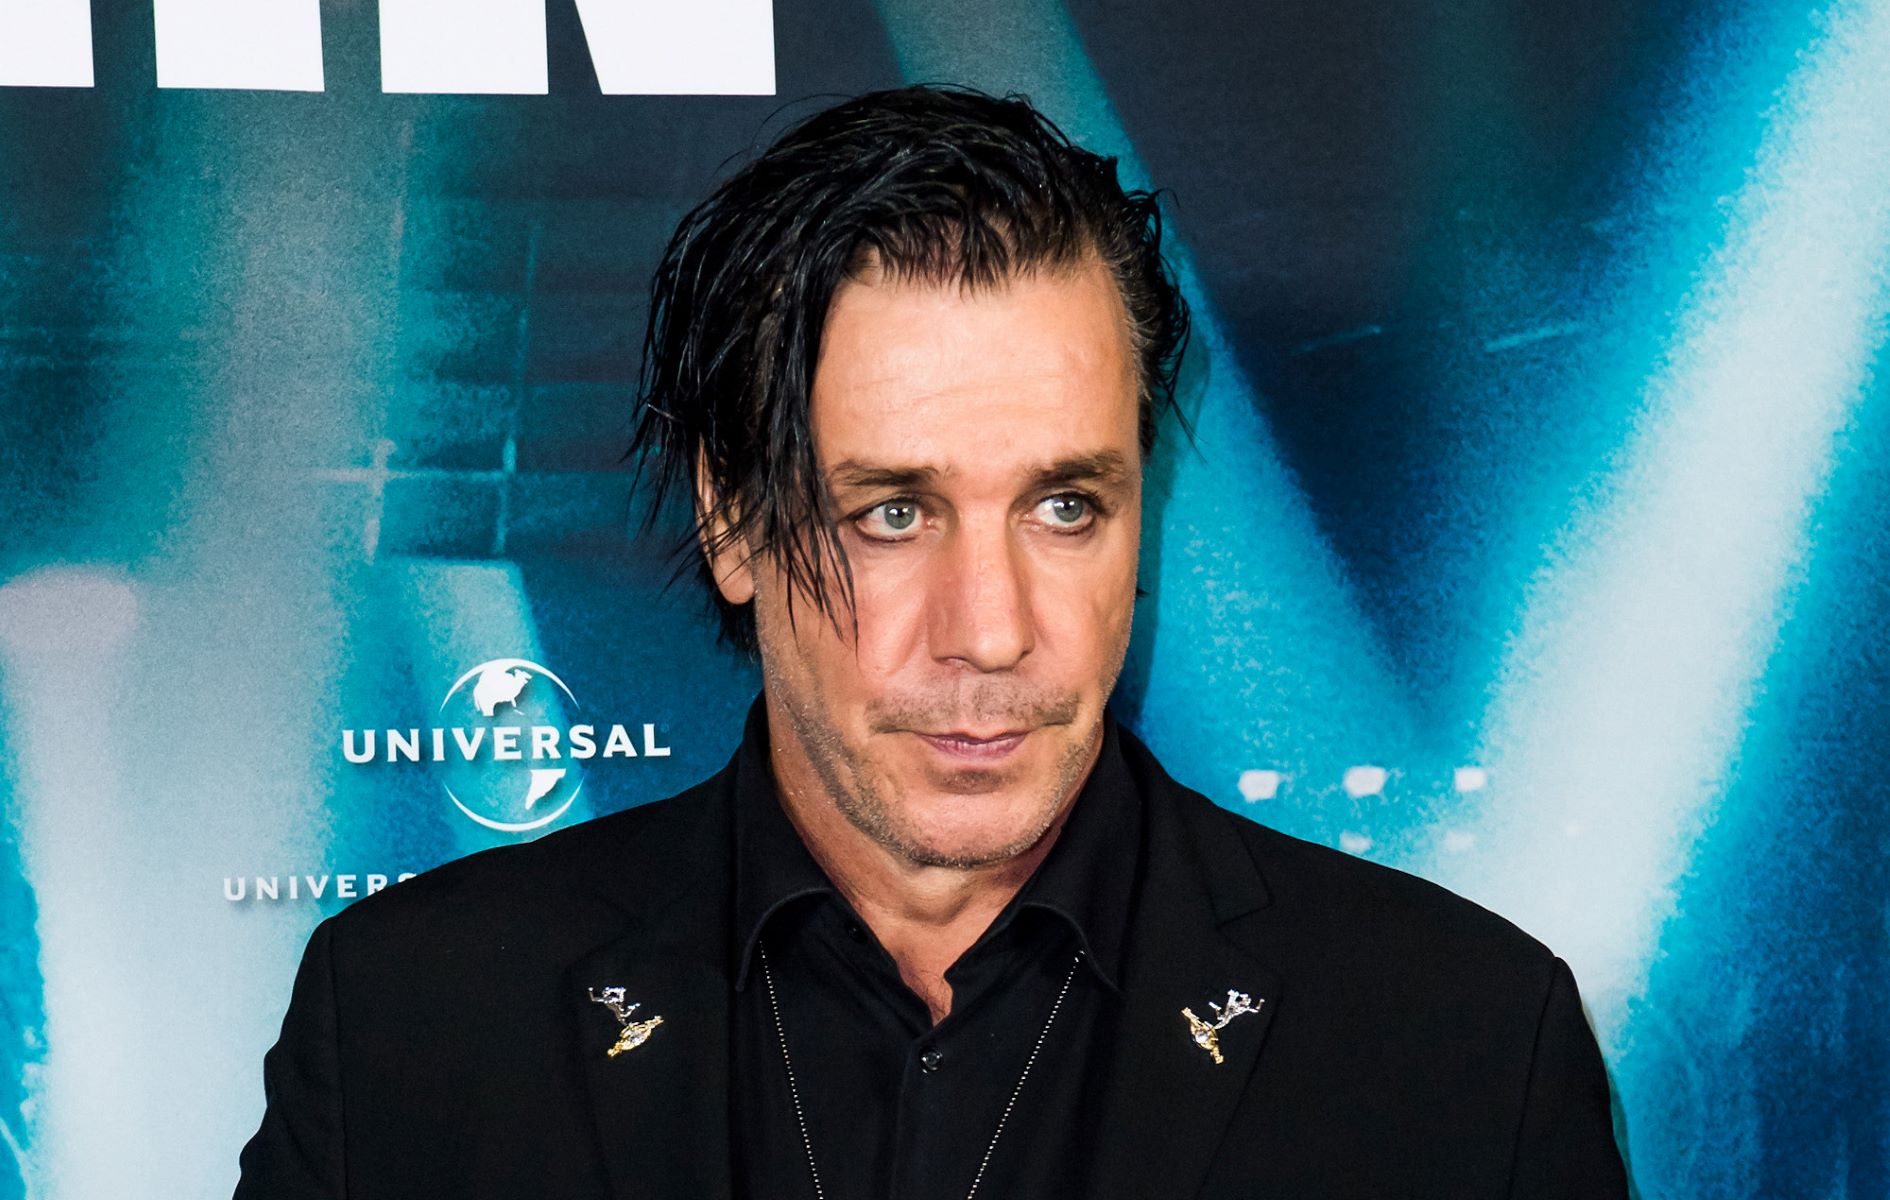 Who Is The Lead Singer Of Rammstein